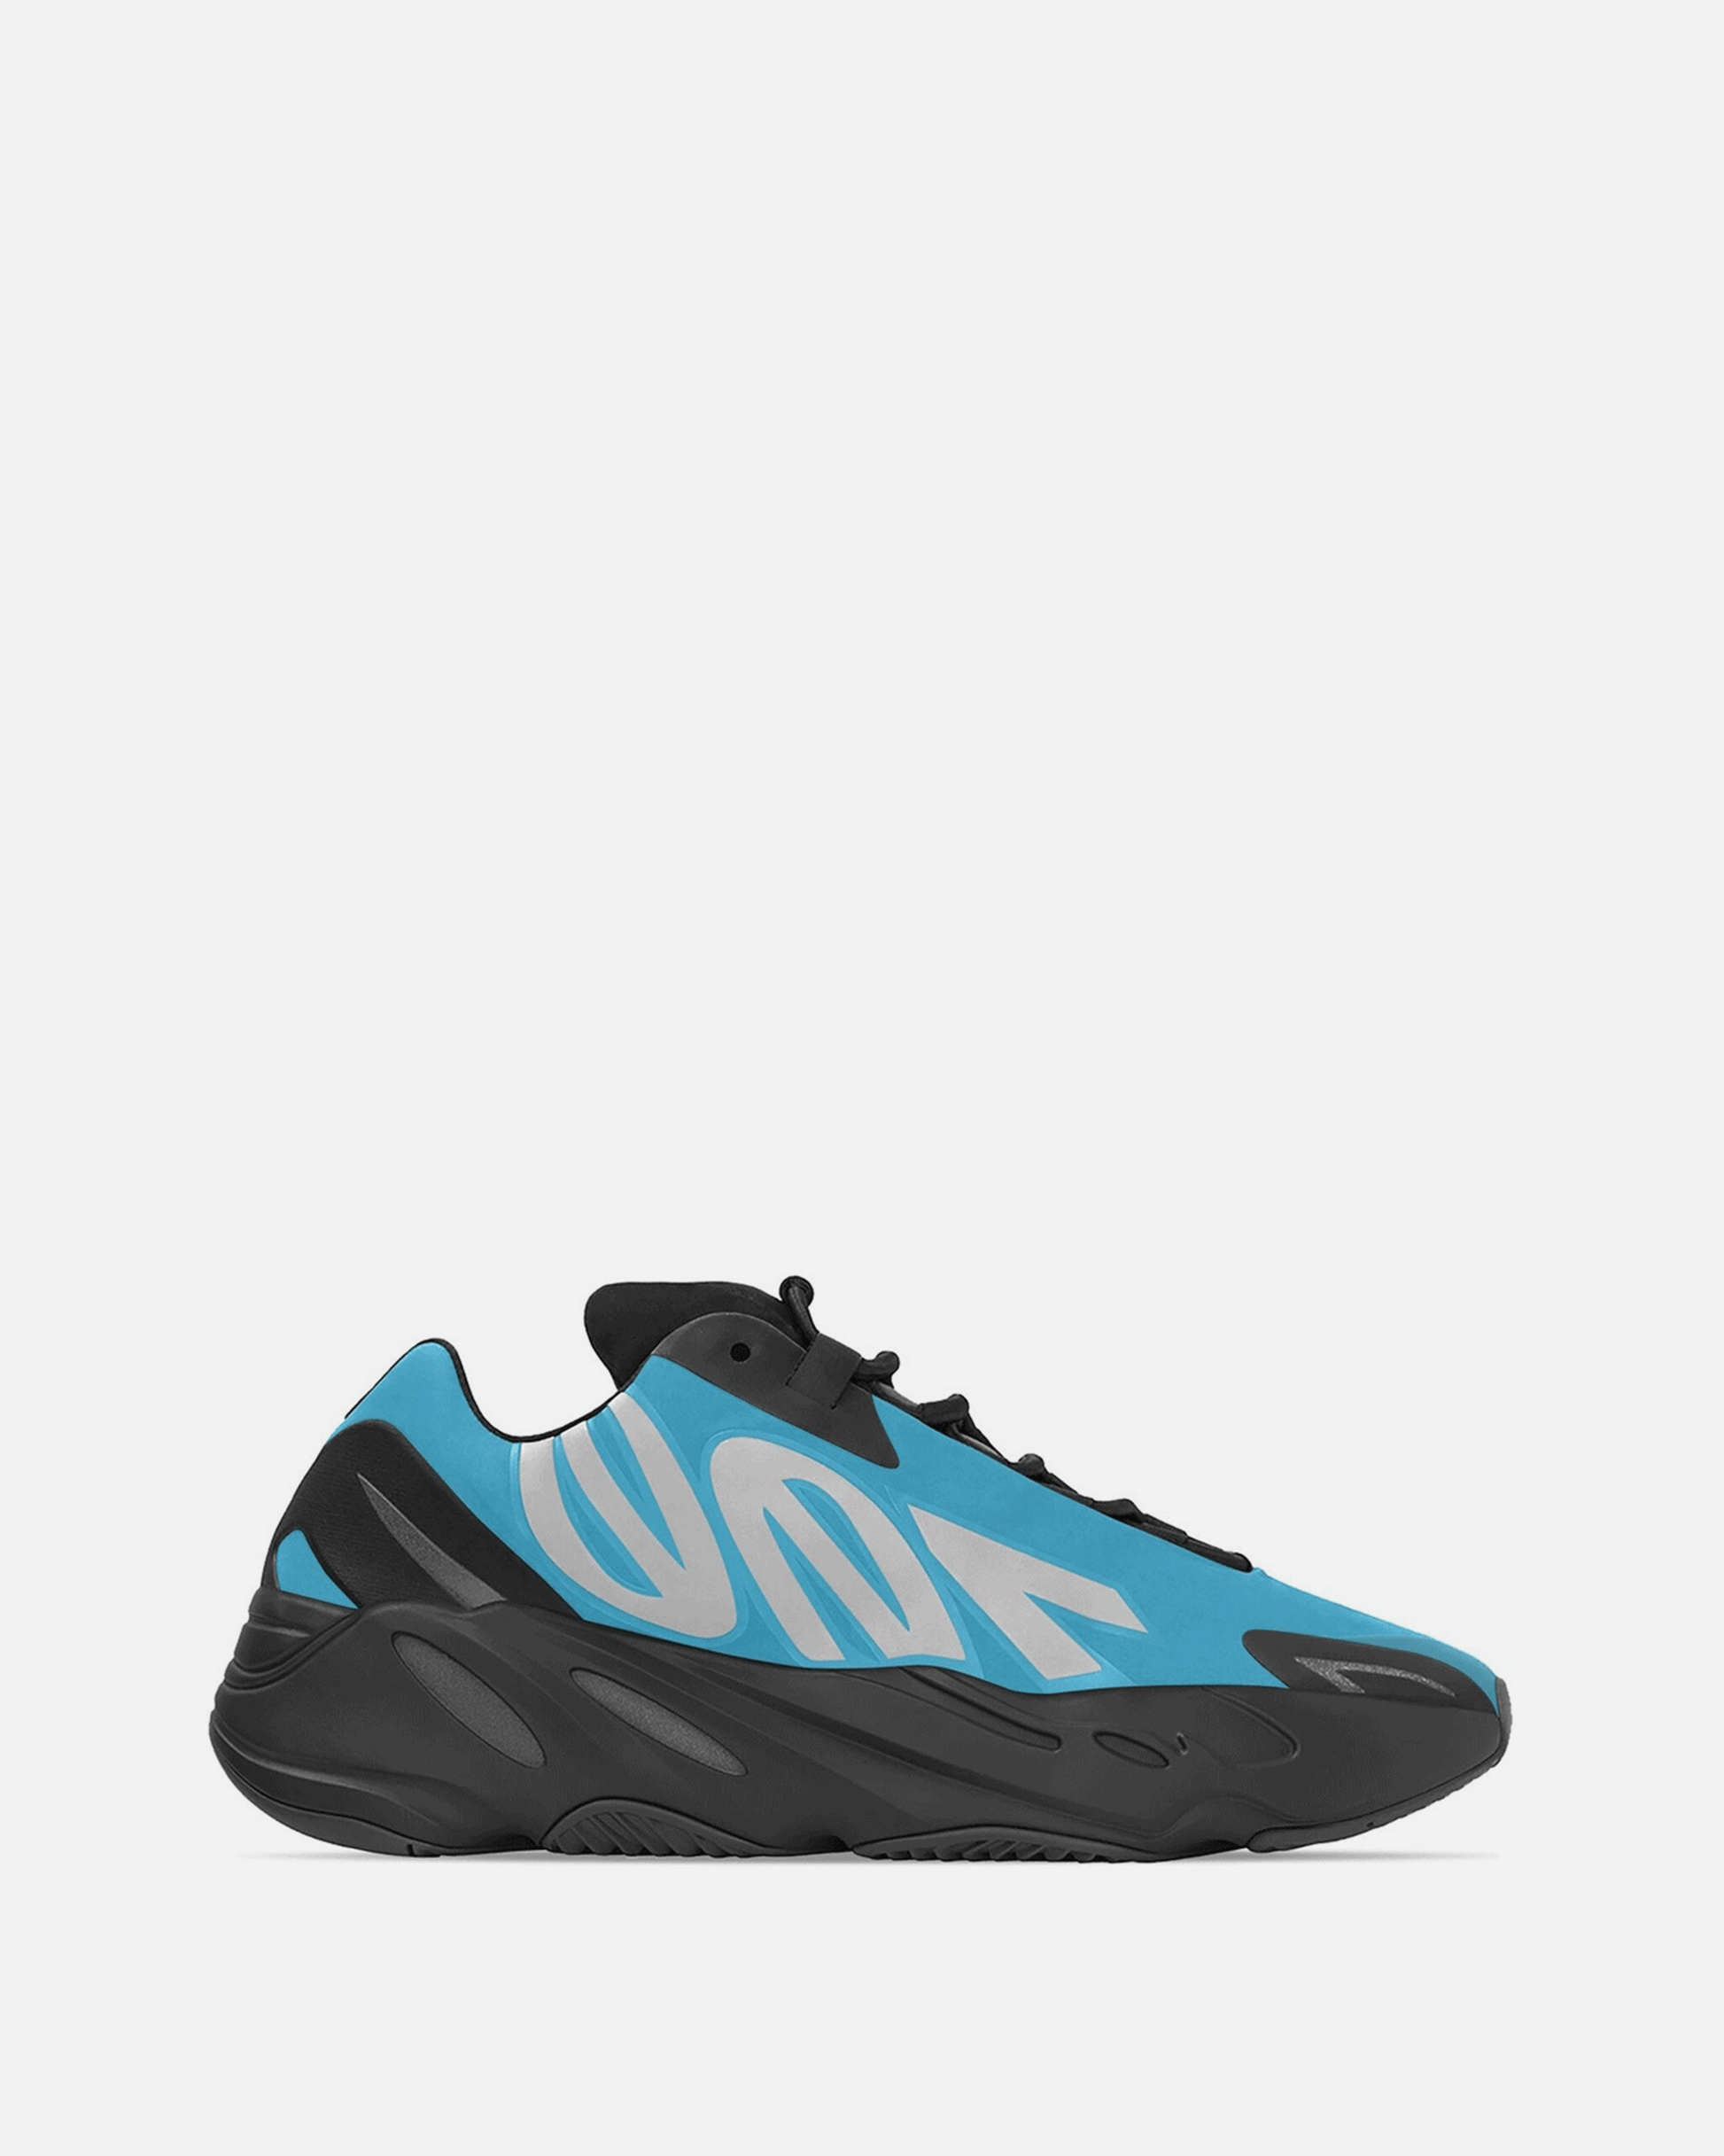 Adidas Releases Yeezy Boost 700 MNVN 'Bright Cyan'